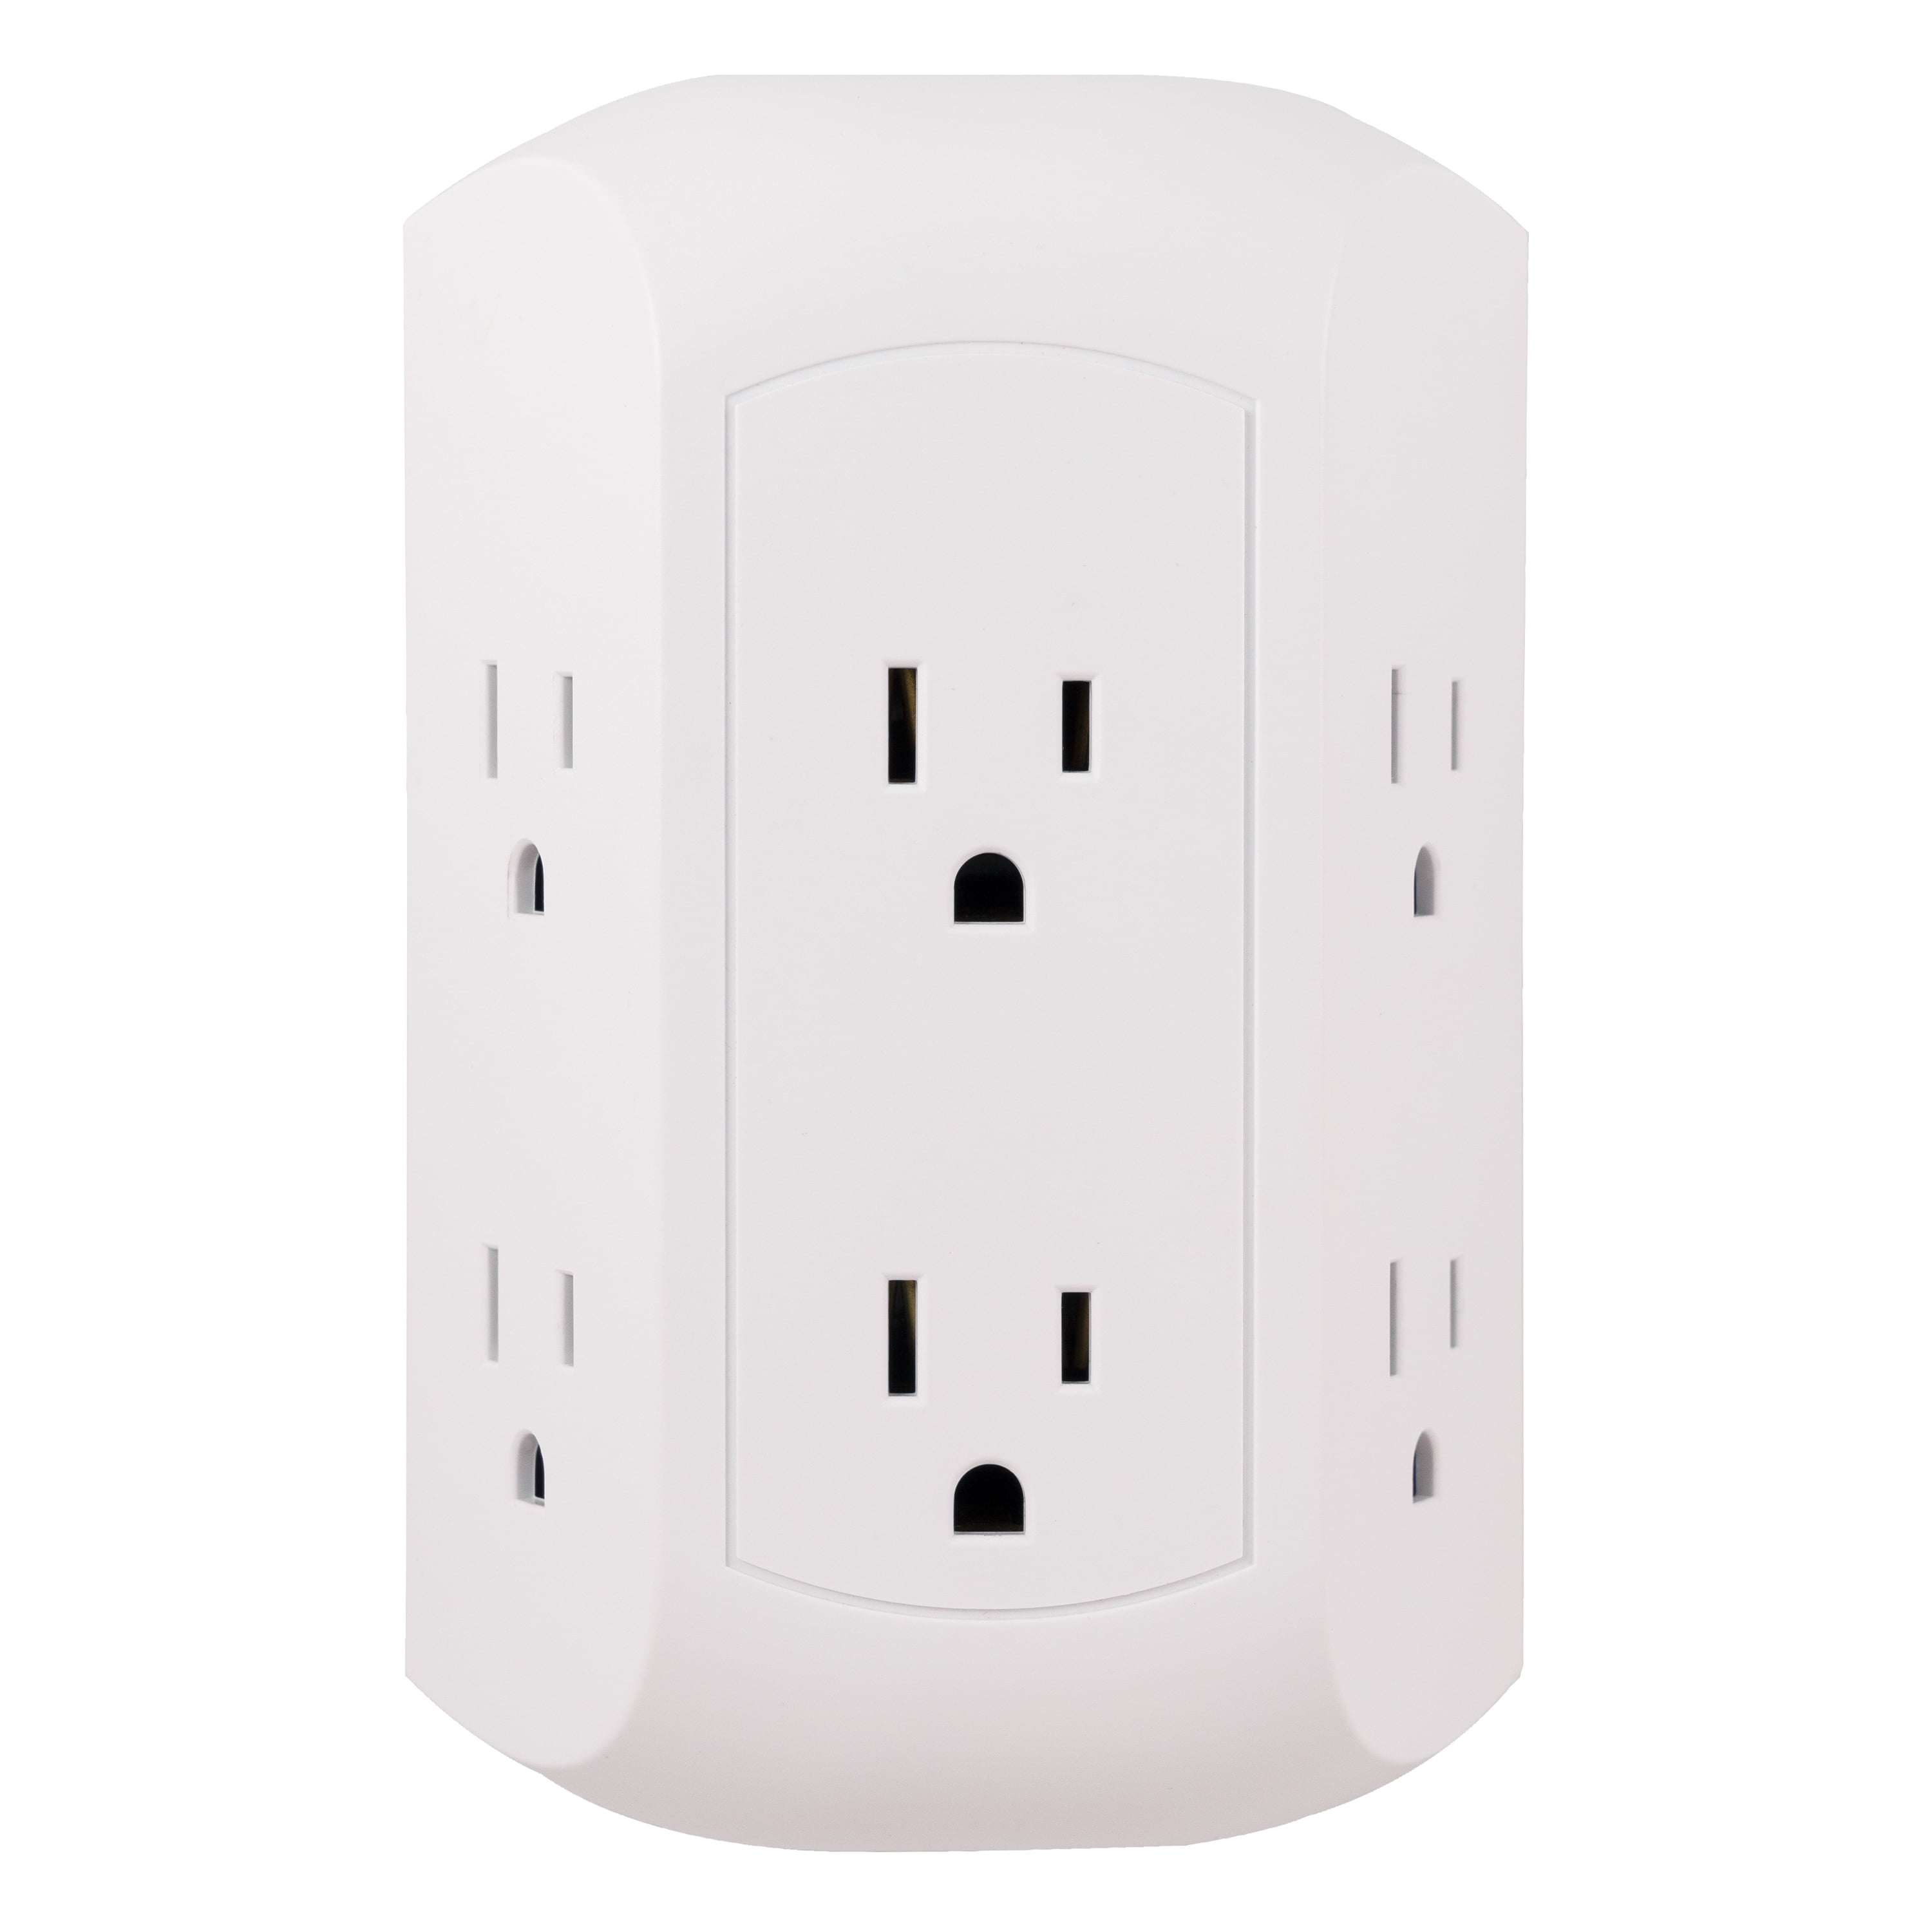 GE Pro 6-Outlet Swivel Wall Tap Surge Protector Power Adapter Multi plug Rotate 